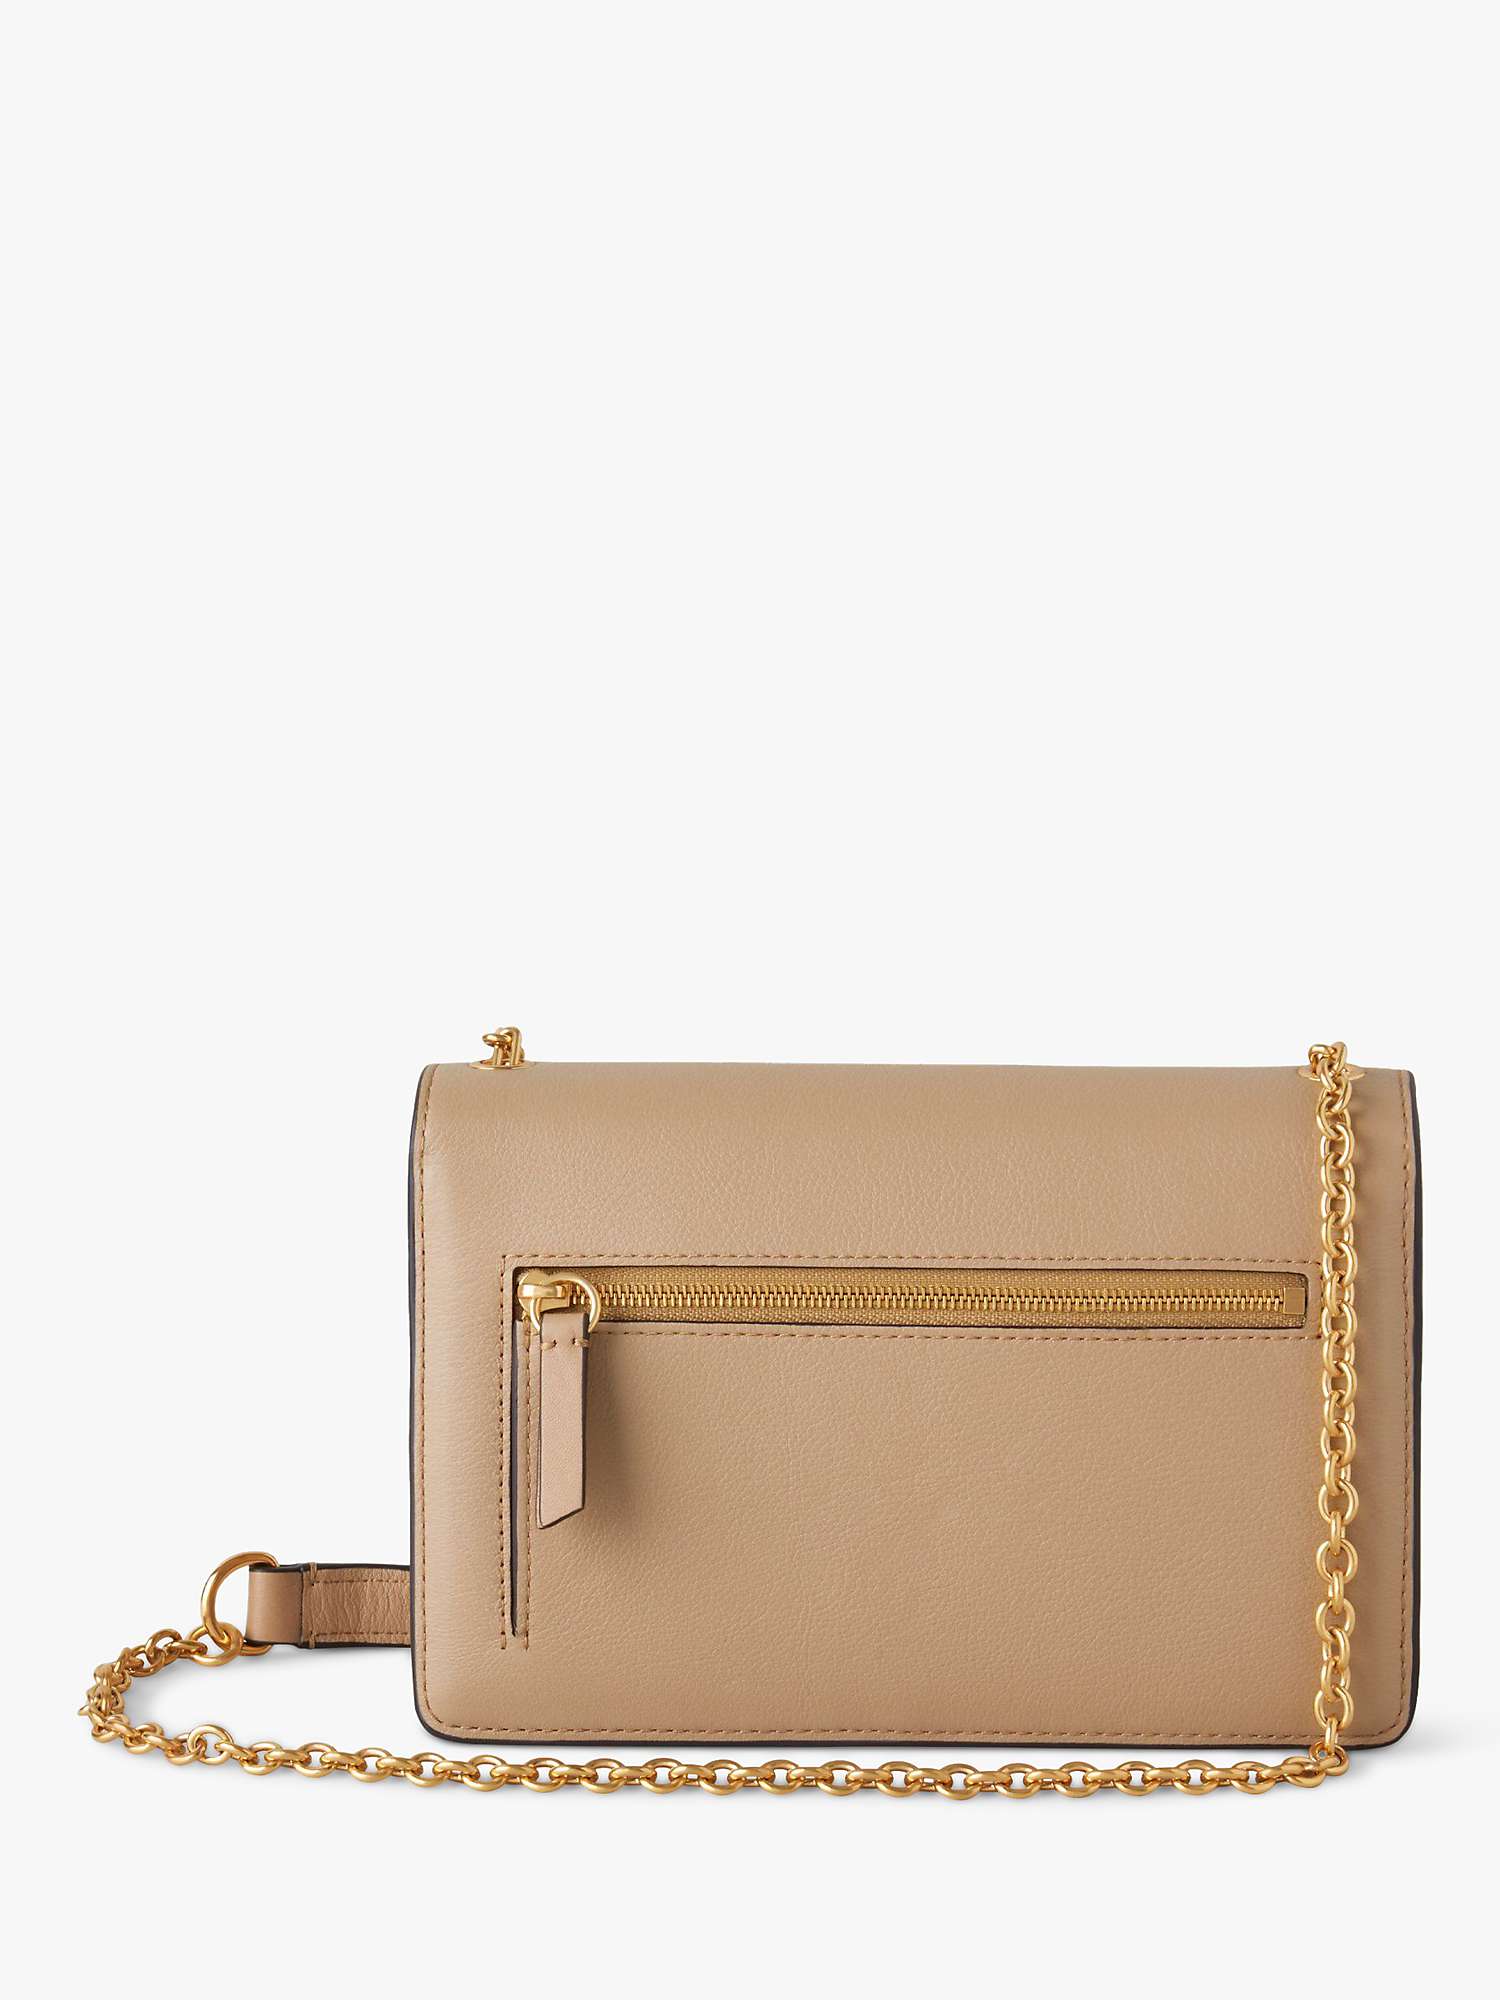 Mulberry Small Darley Silky Calf Leather Cross Body Bag, Maple at John ...